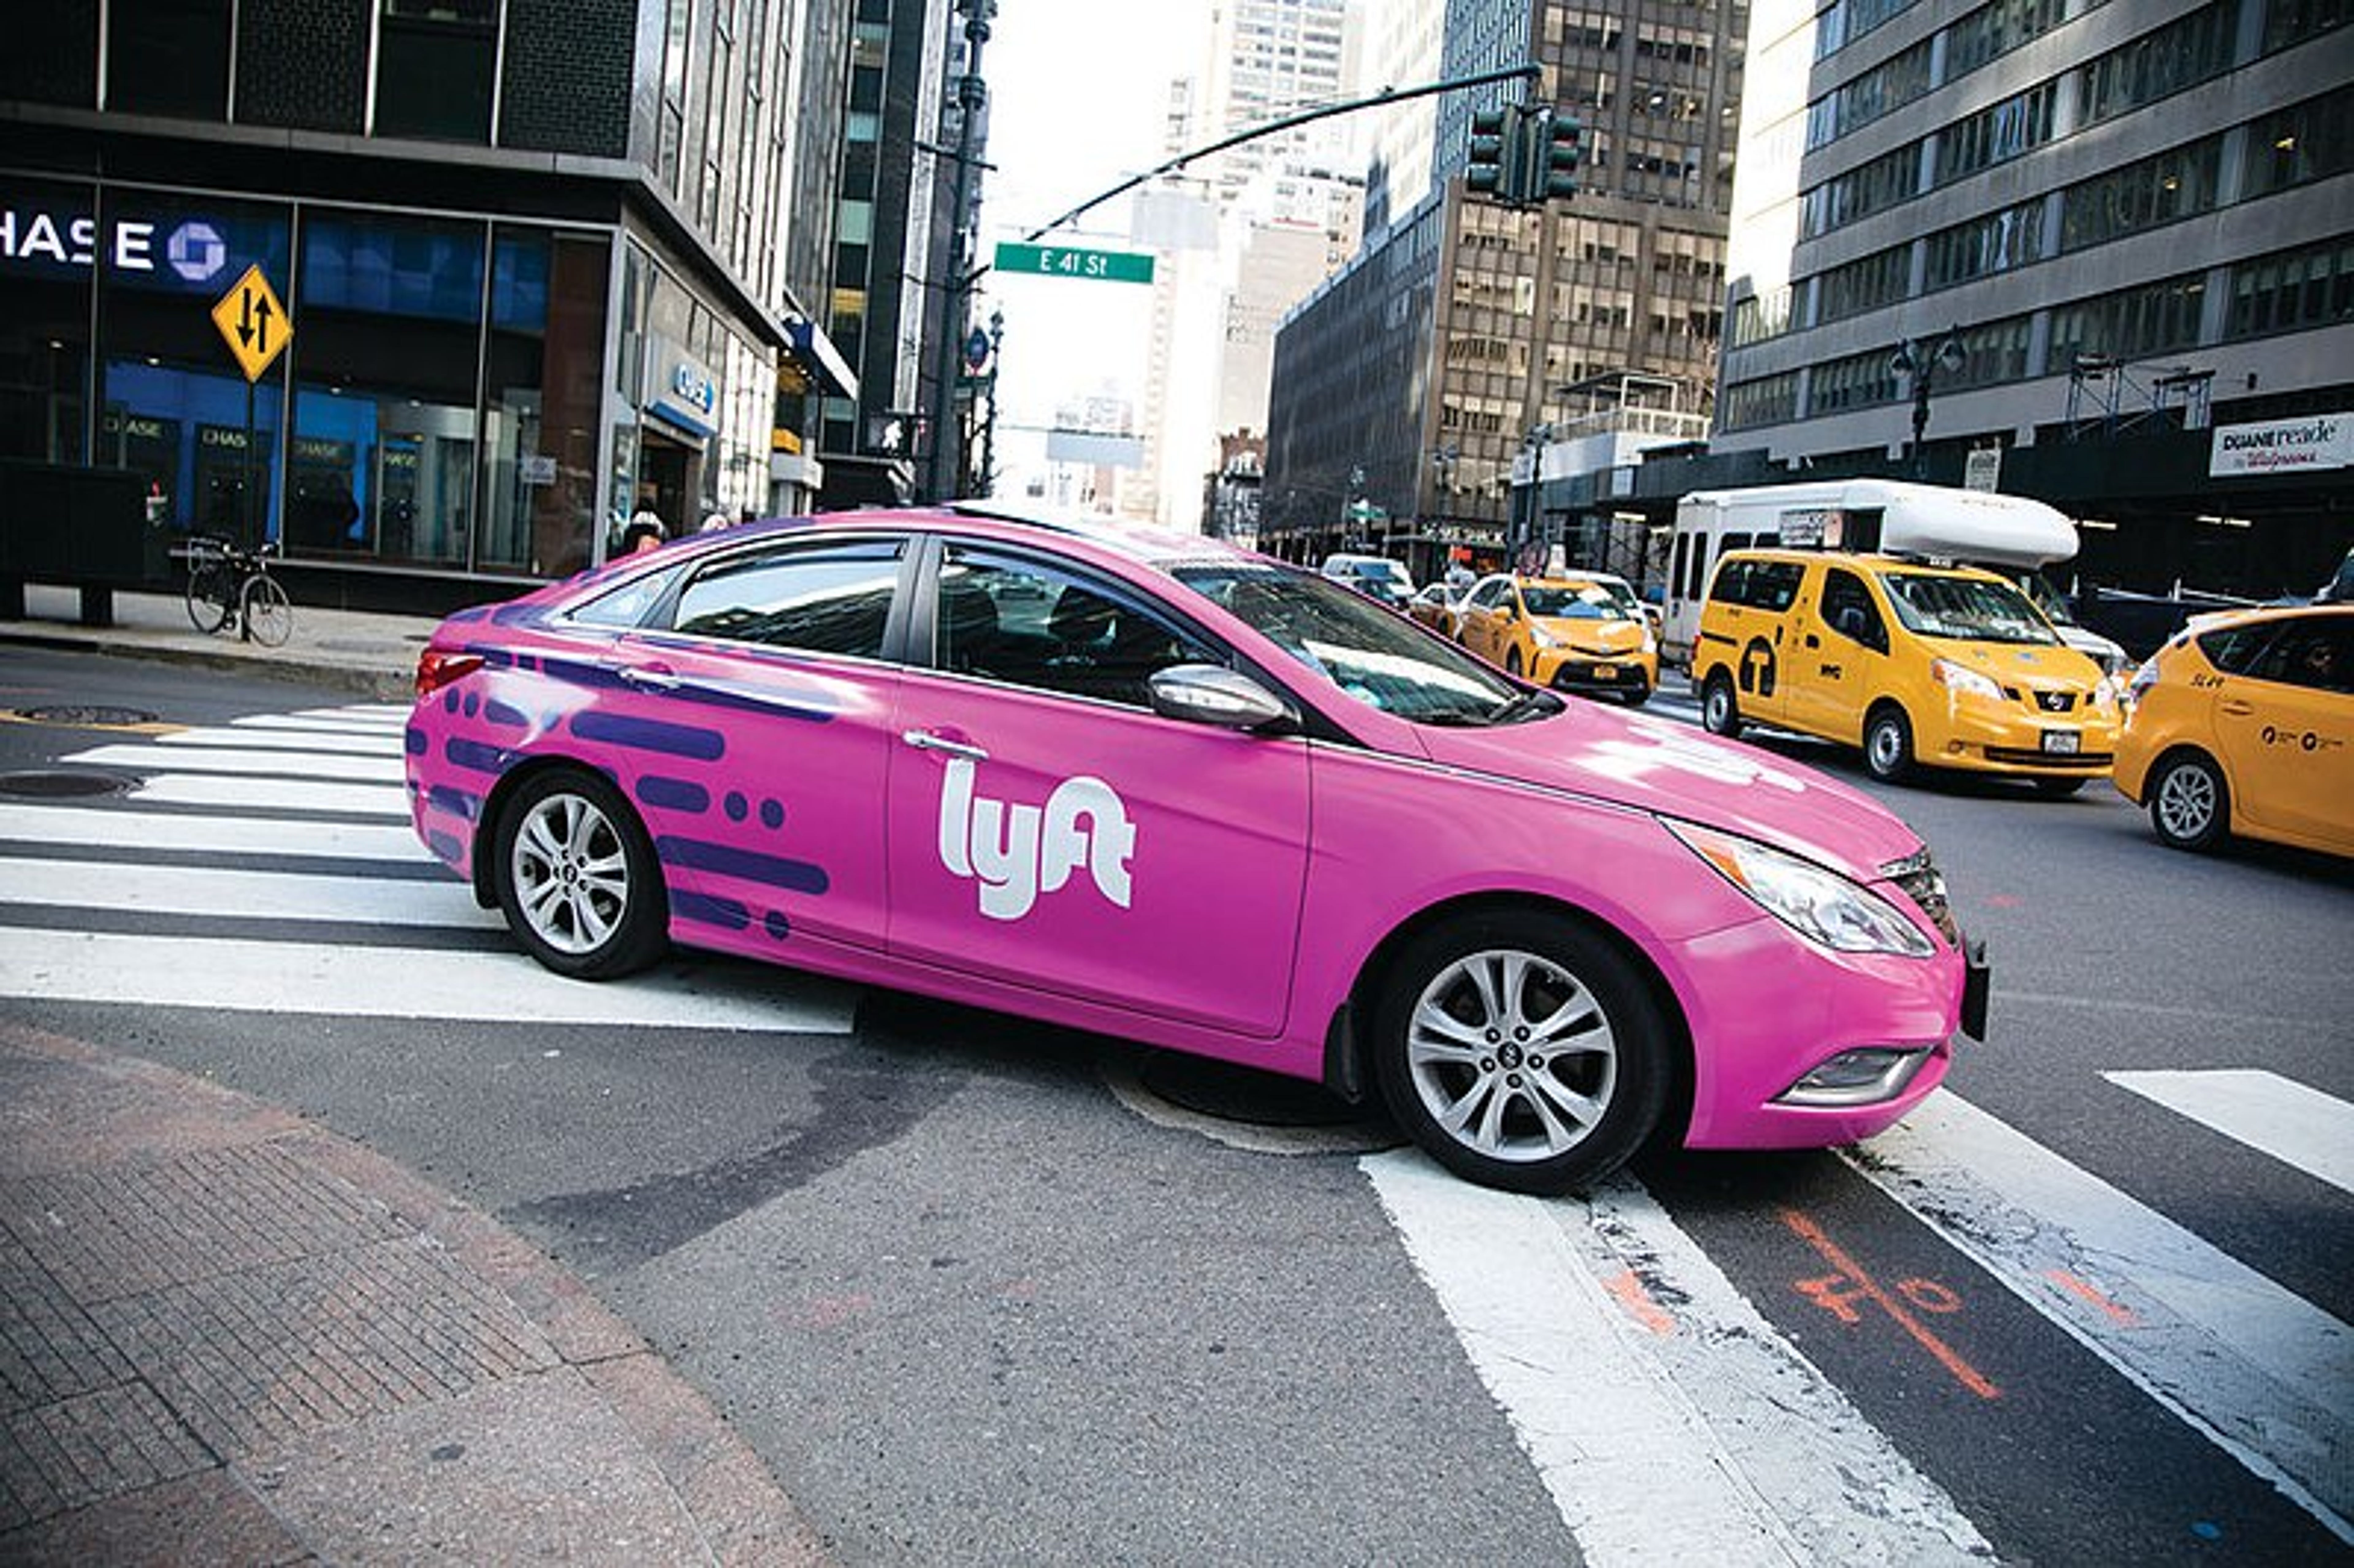 Lyft Joins The Likes Of Amazon To Sublease Offices To Curb Costs: Report